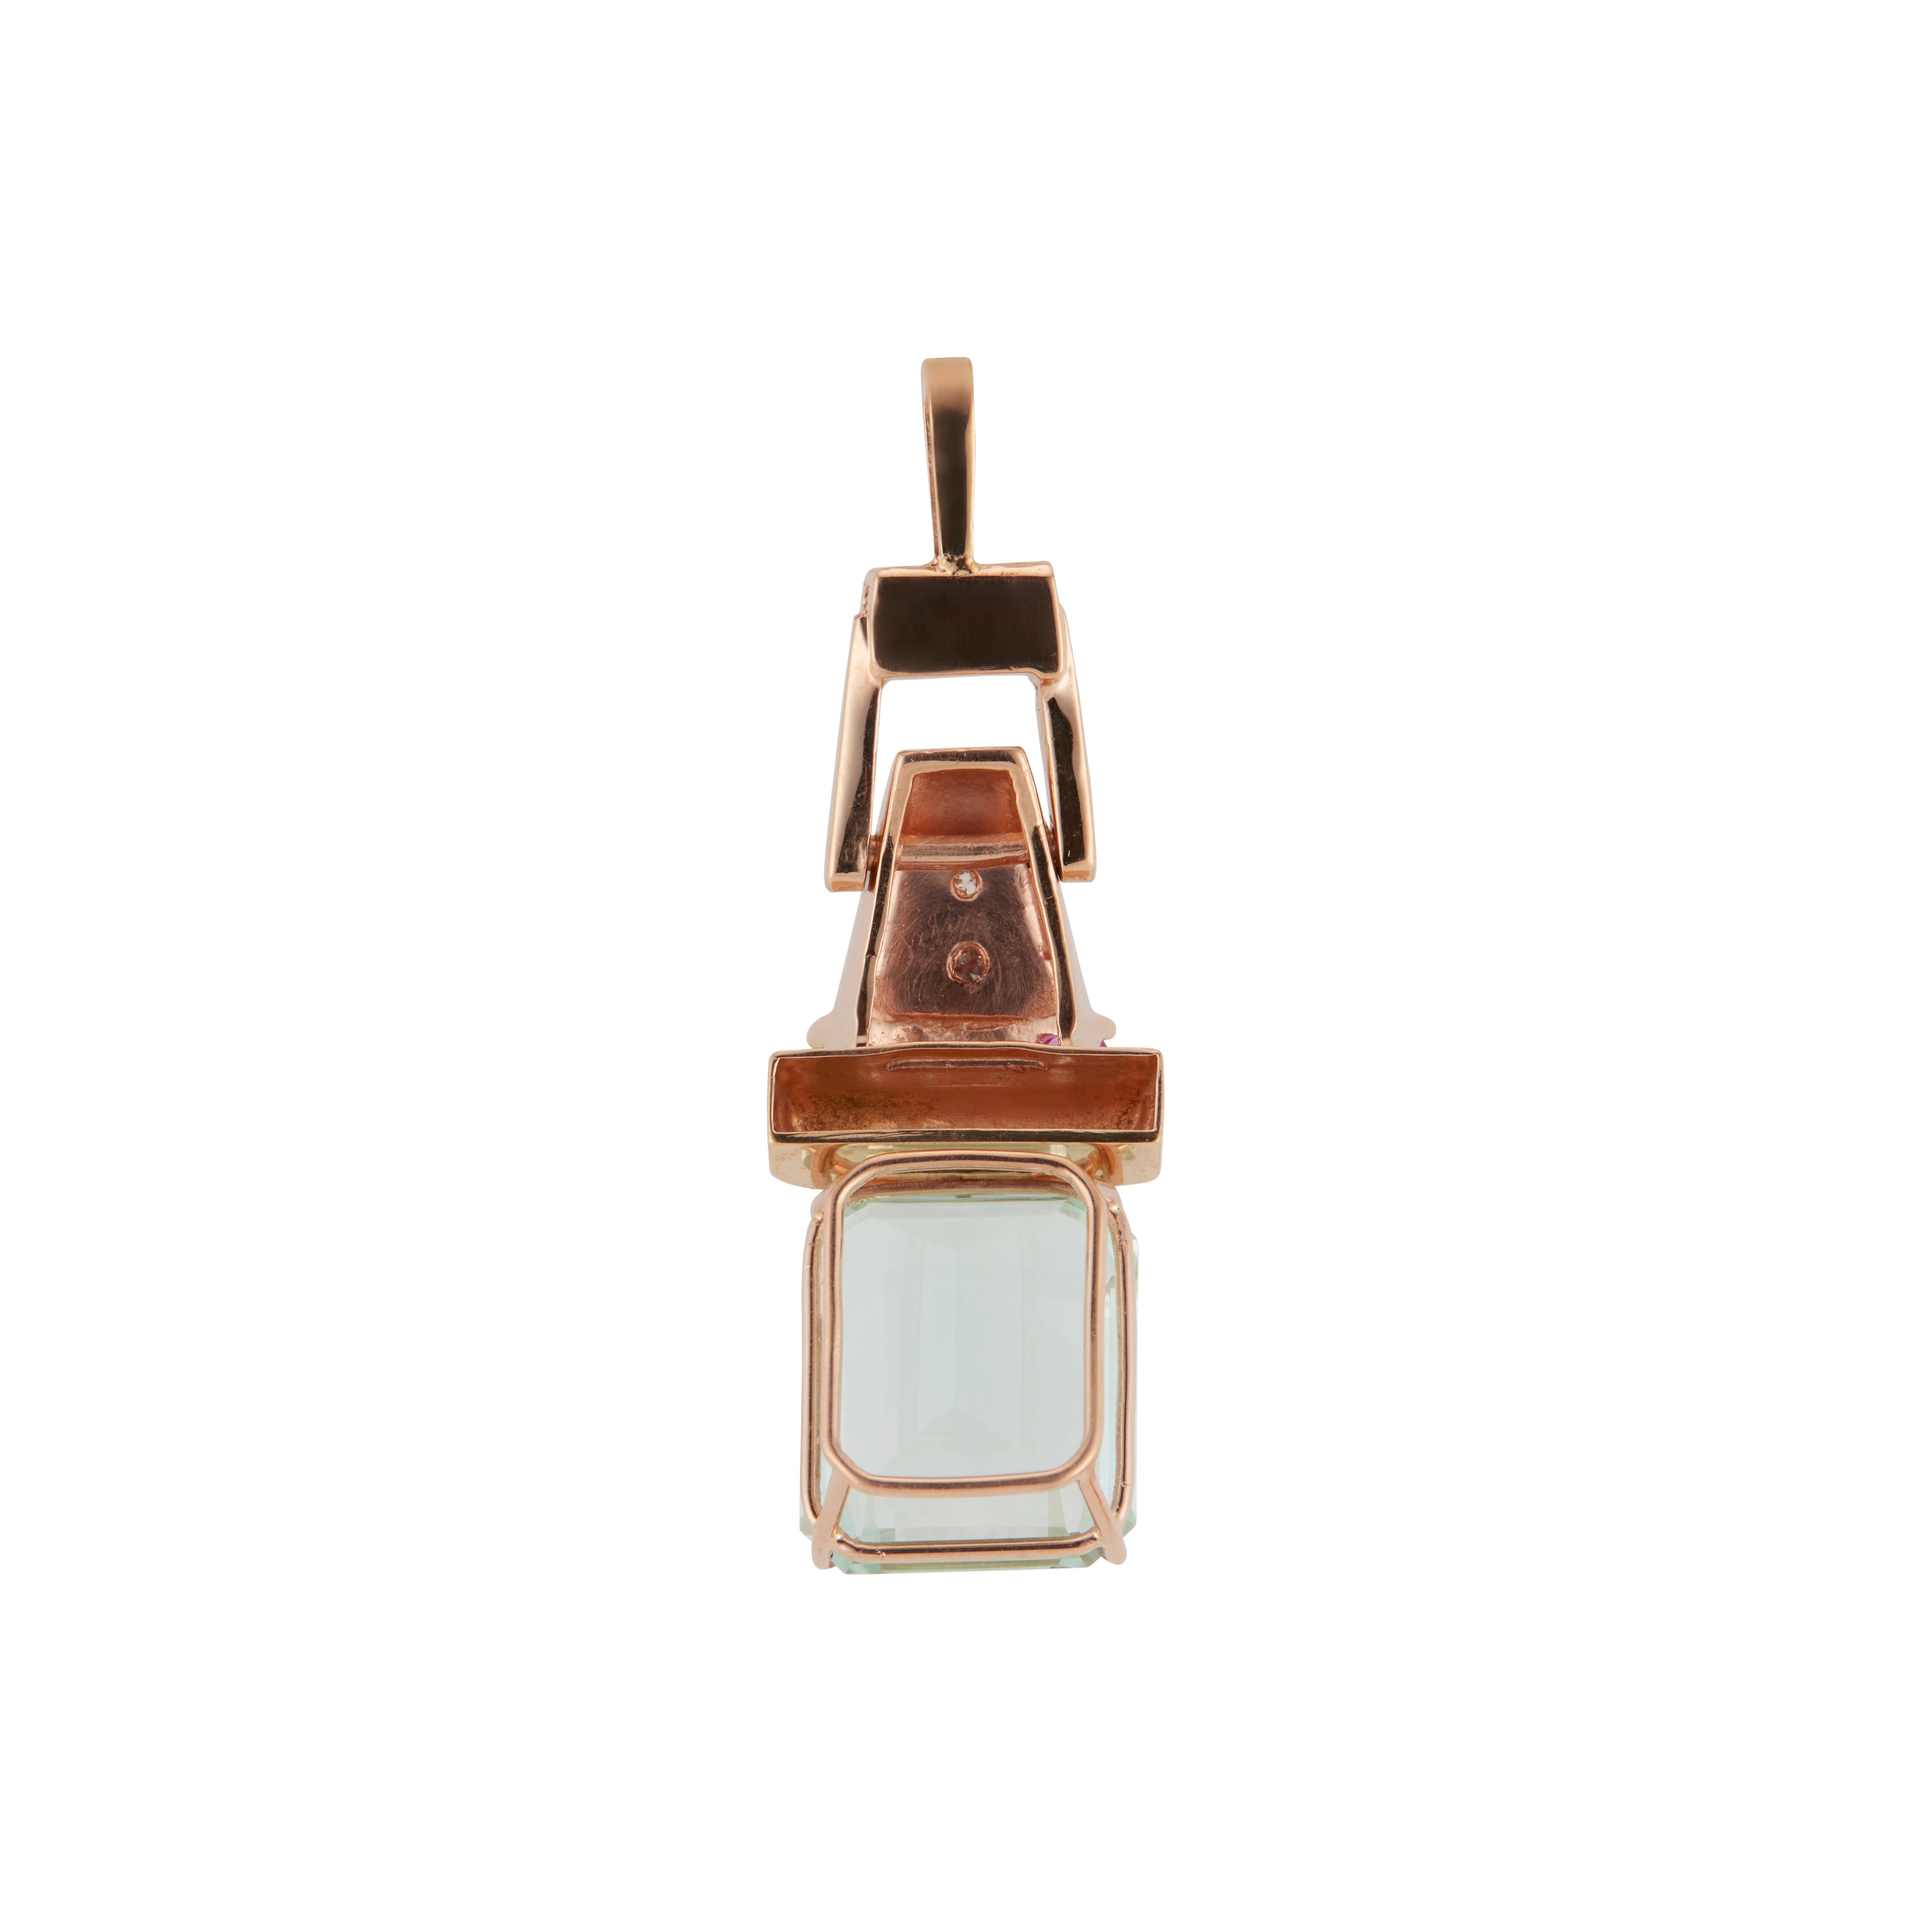 Original Retro Art Deco handmade hinged pendant in 14k rose and white gold. 10.17 emerald step cut aquamarine accented with four rubies and 6 round diamonds, white gold under the diamonds. On Peter's now famous pink gold scale of 1 to 10 with 10 as